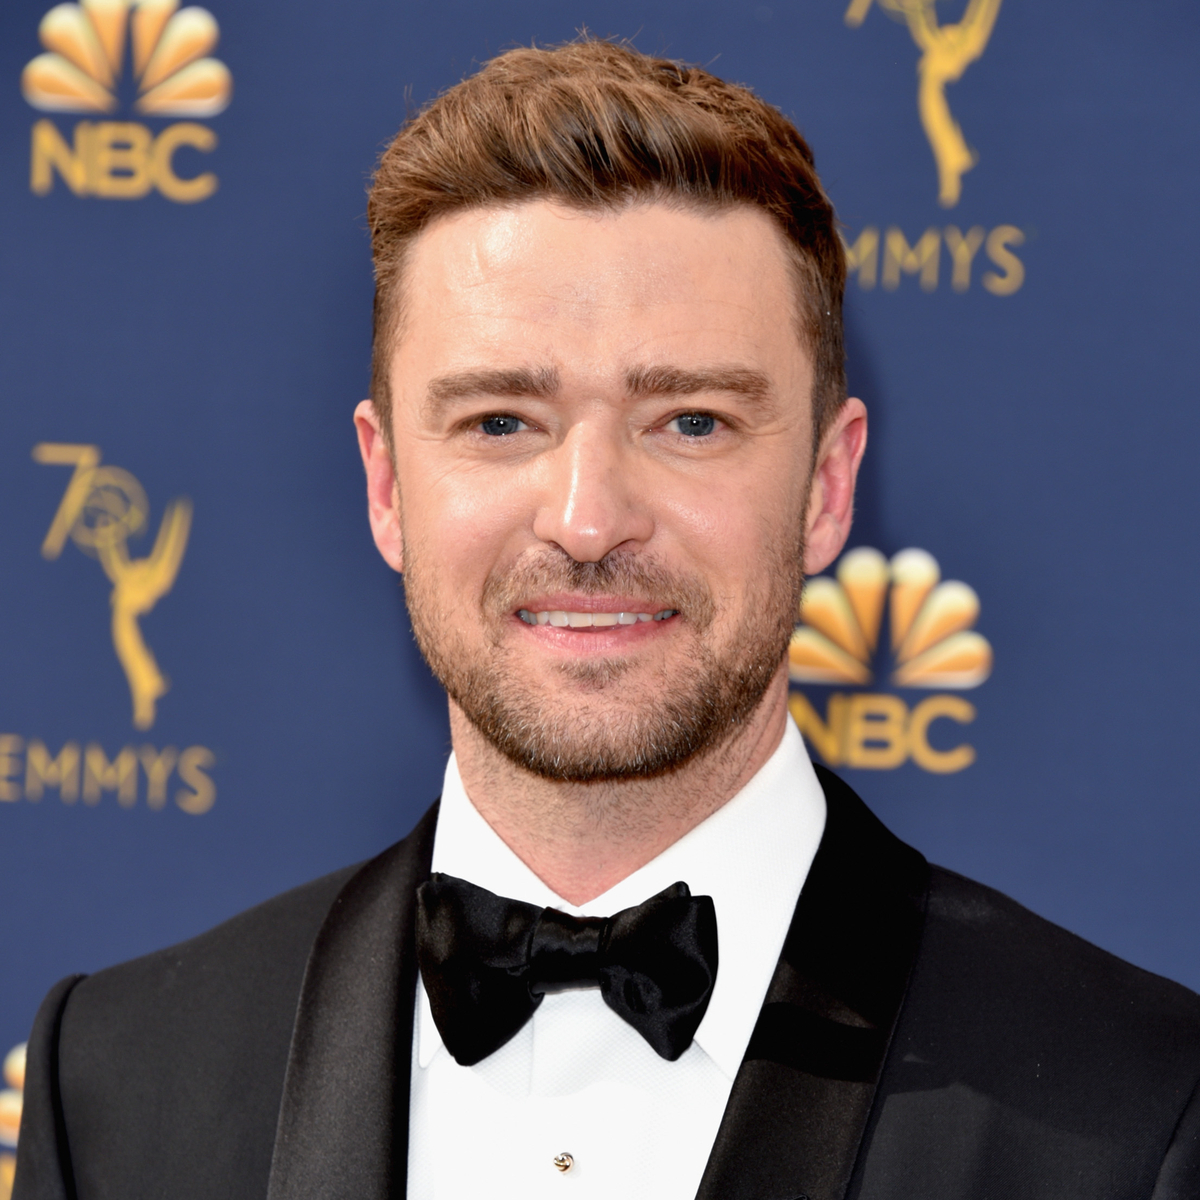 Justin Timberlake Arrested for DWI in New York